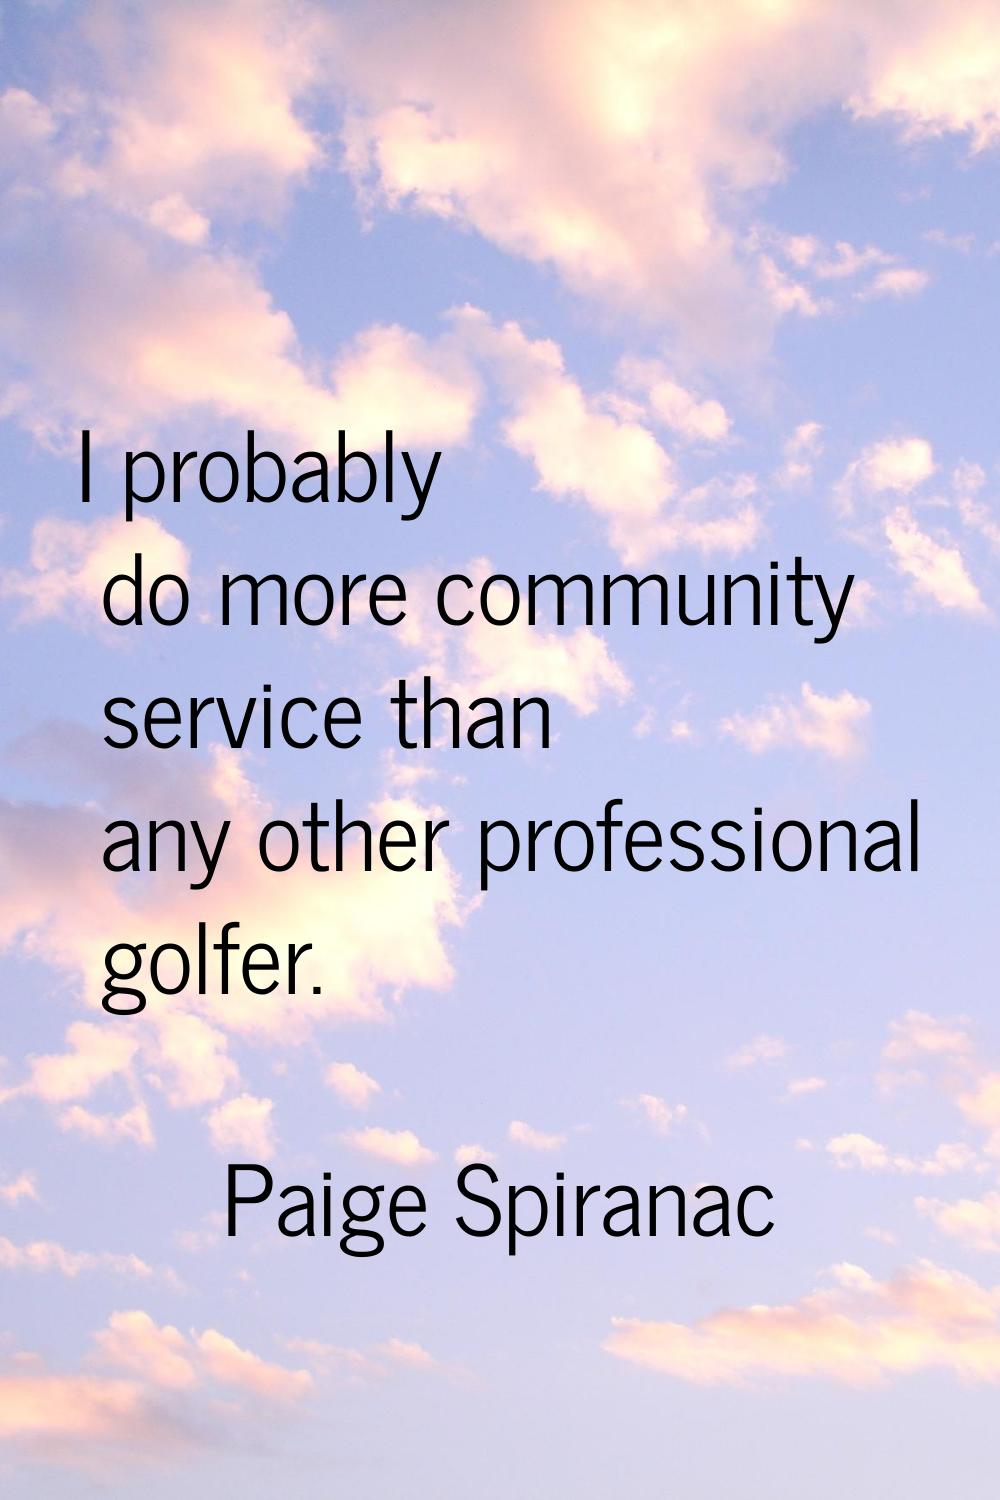 I probably do more community service than any other professional golfer.